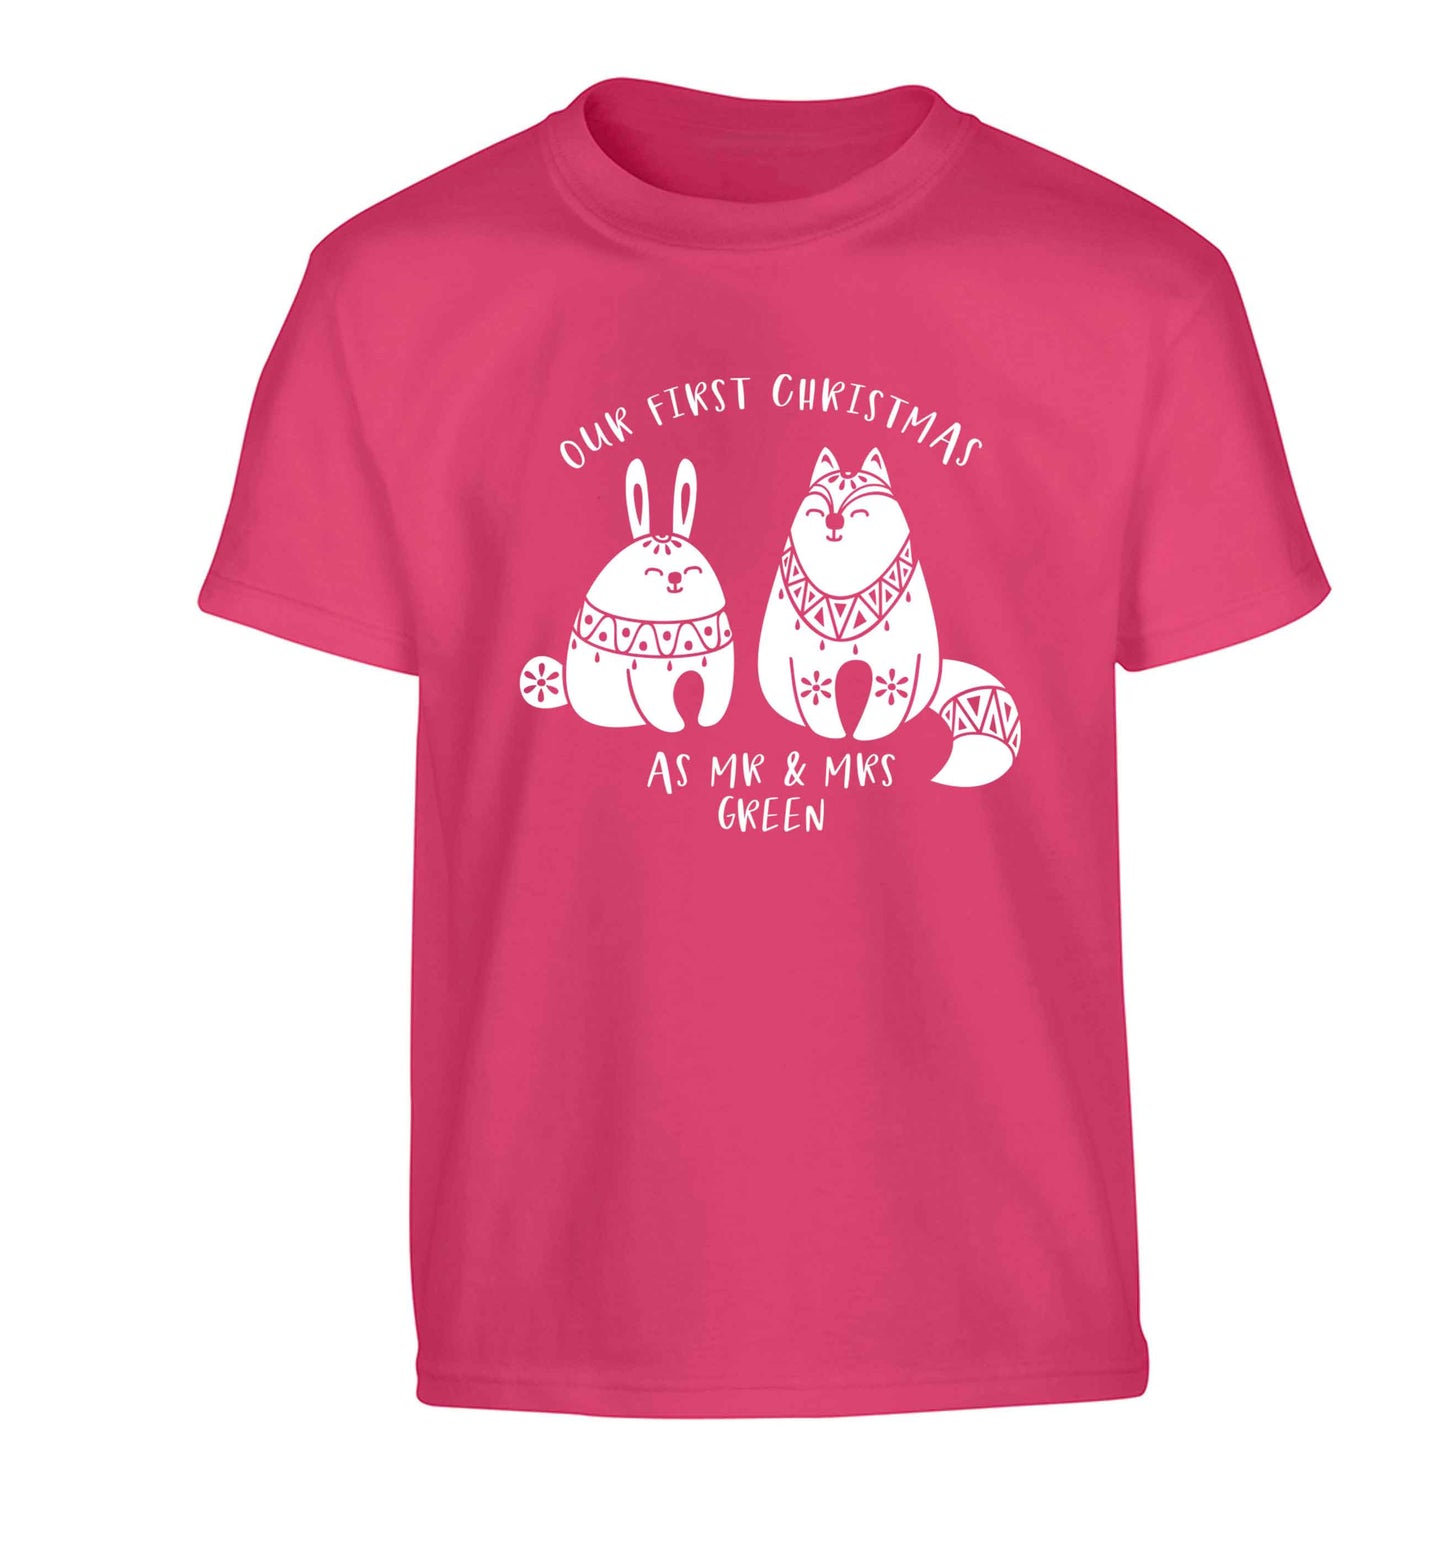 Our first Christmas as Mr & Mrs personalised Children's pink Tshirt 12-13 Years